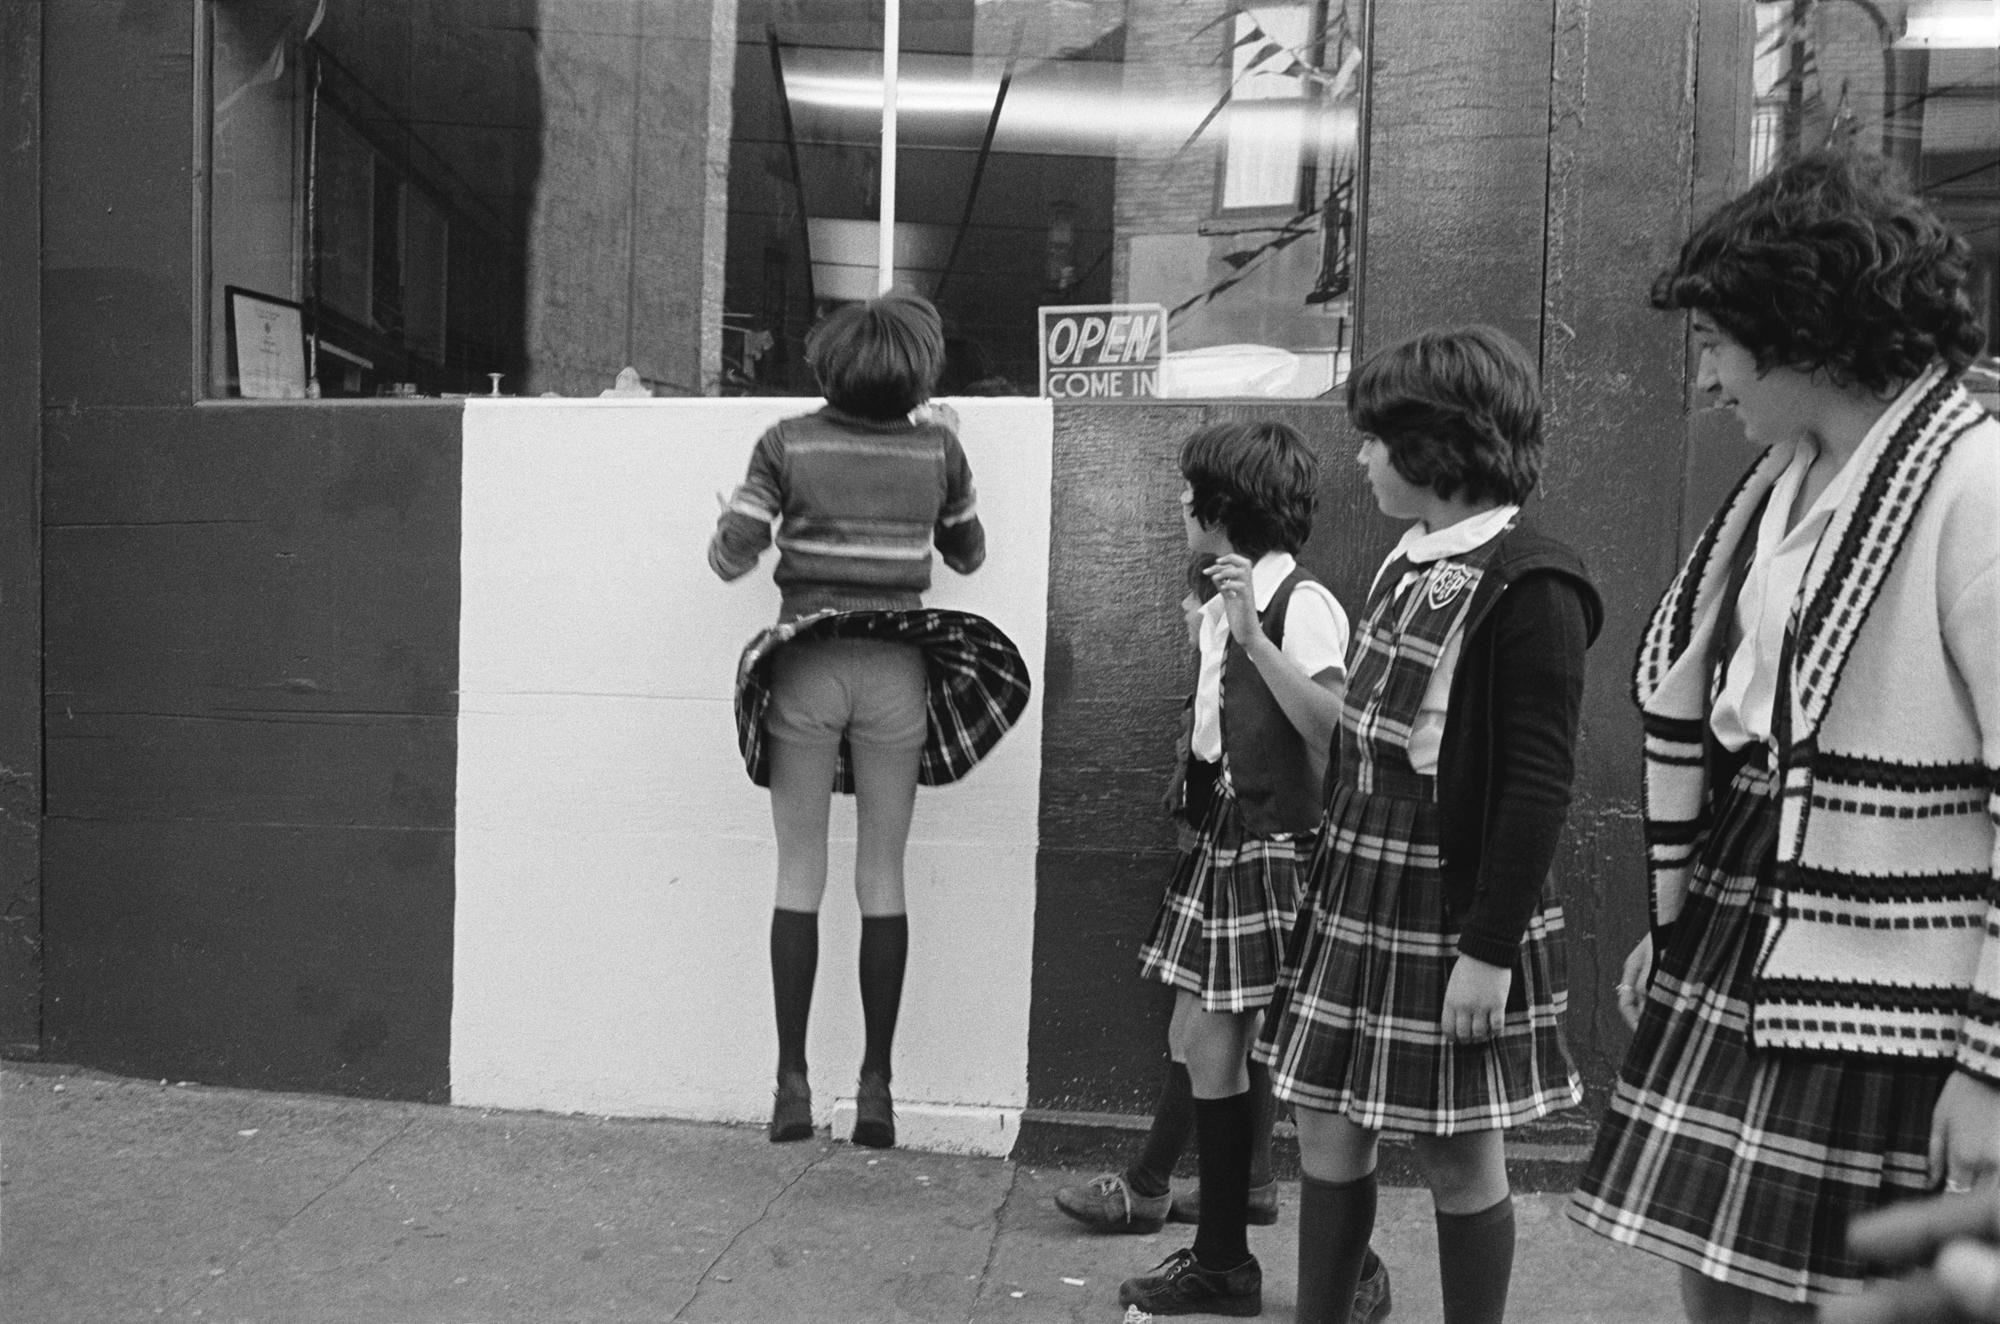 After school on the corner of Prince and Mott Streets, 1976